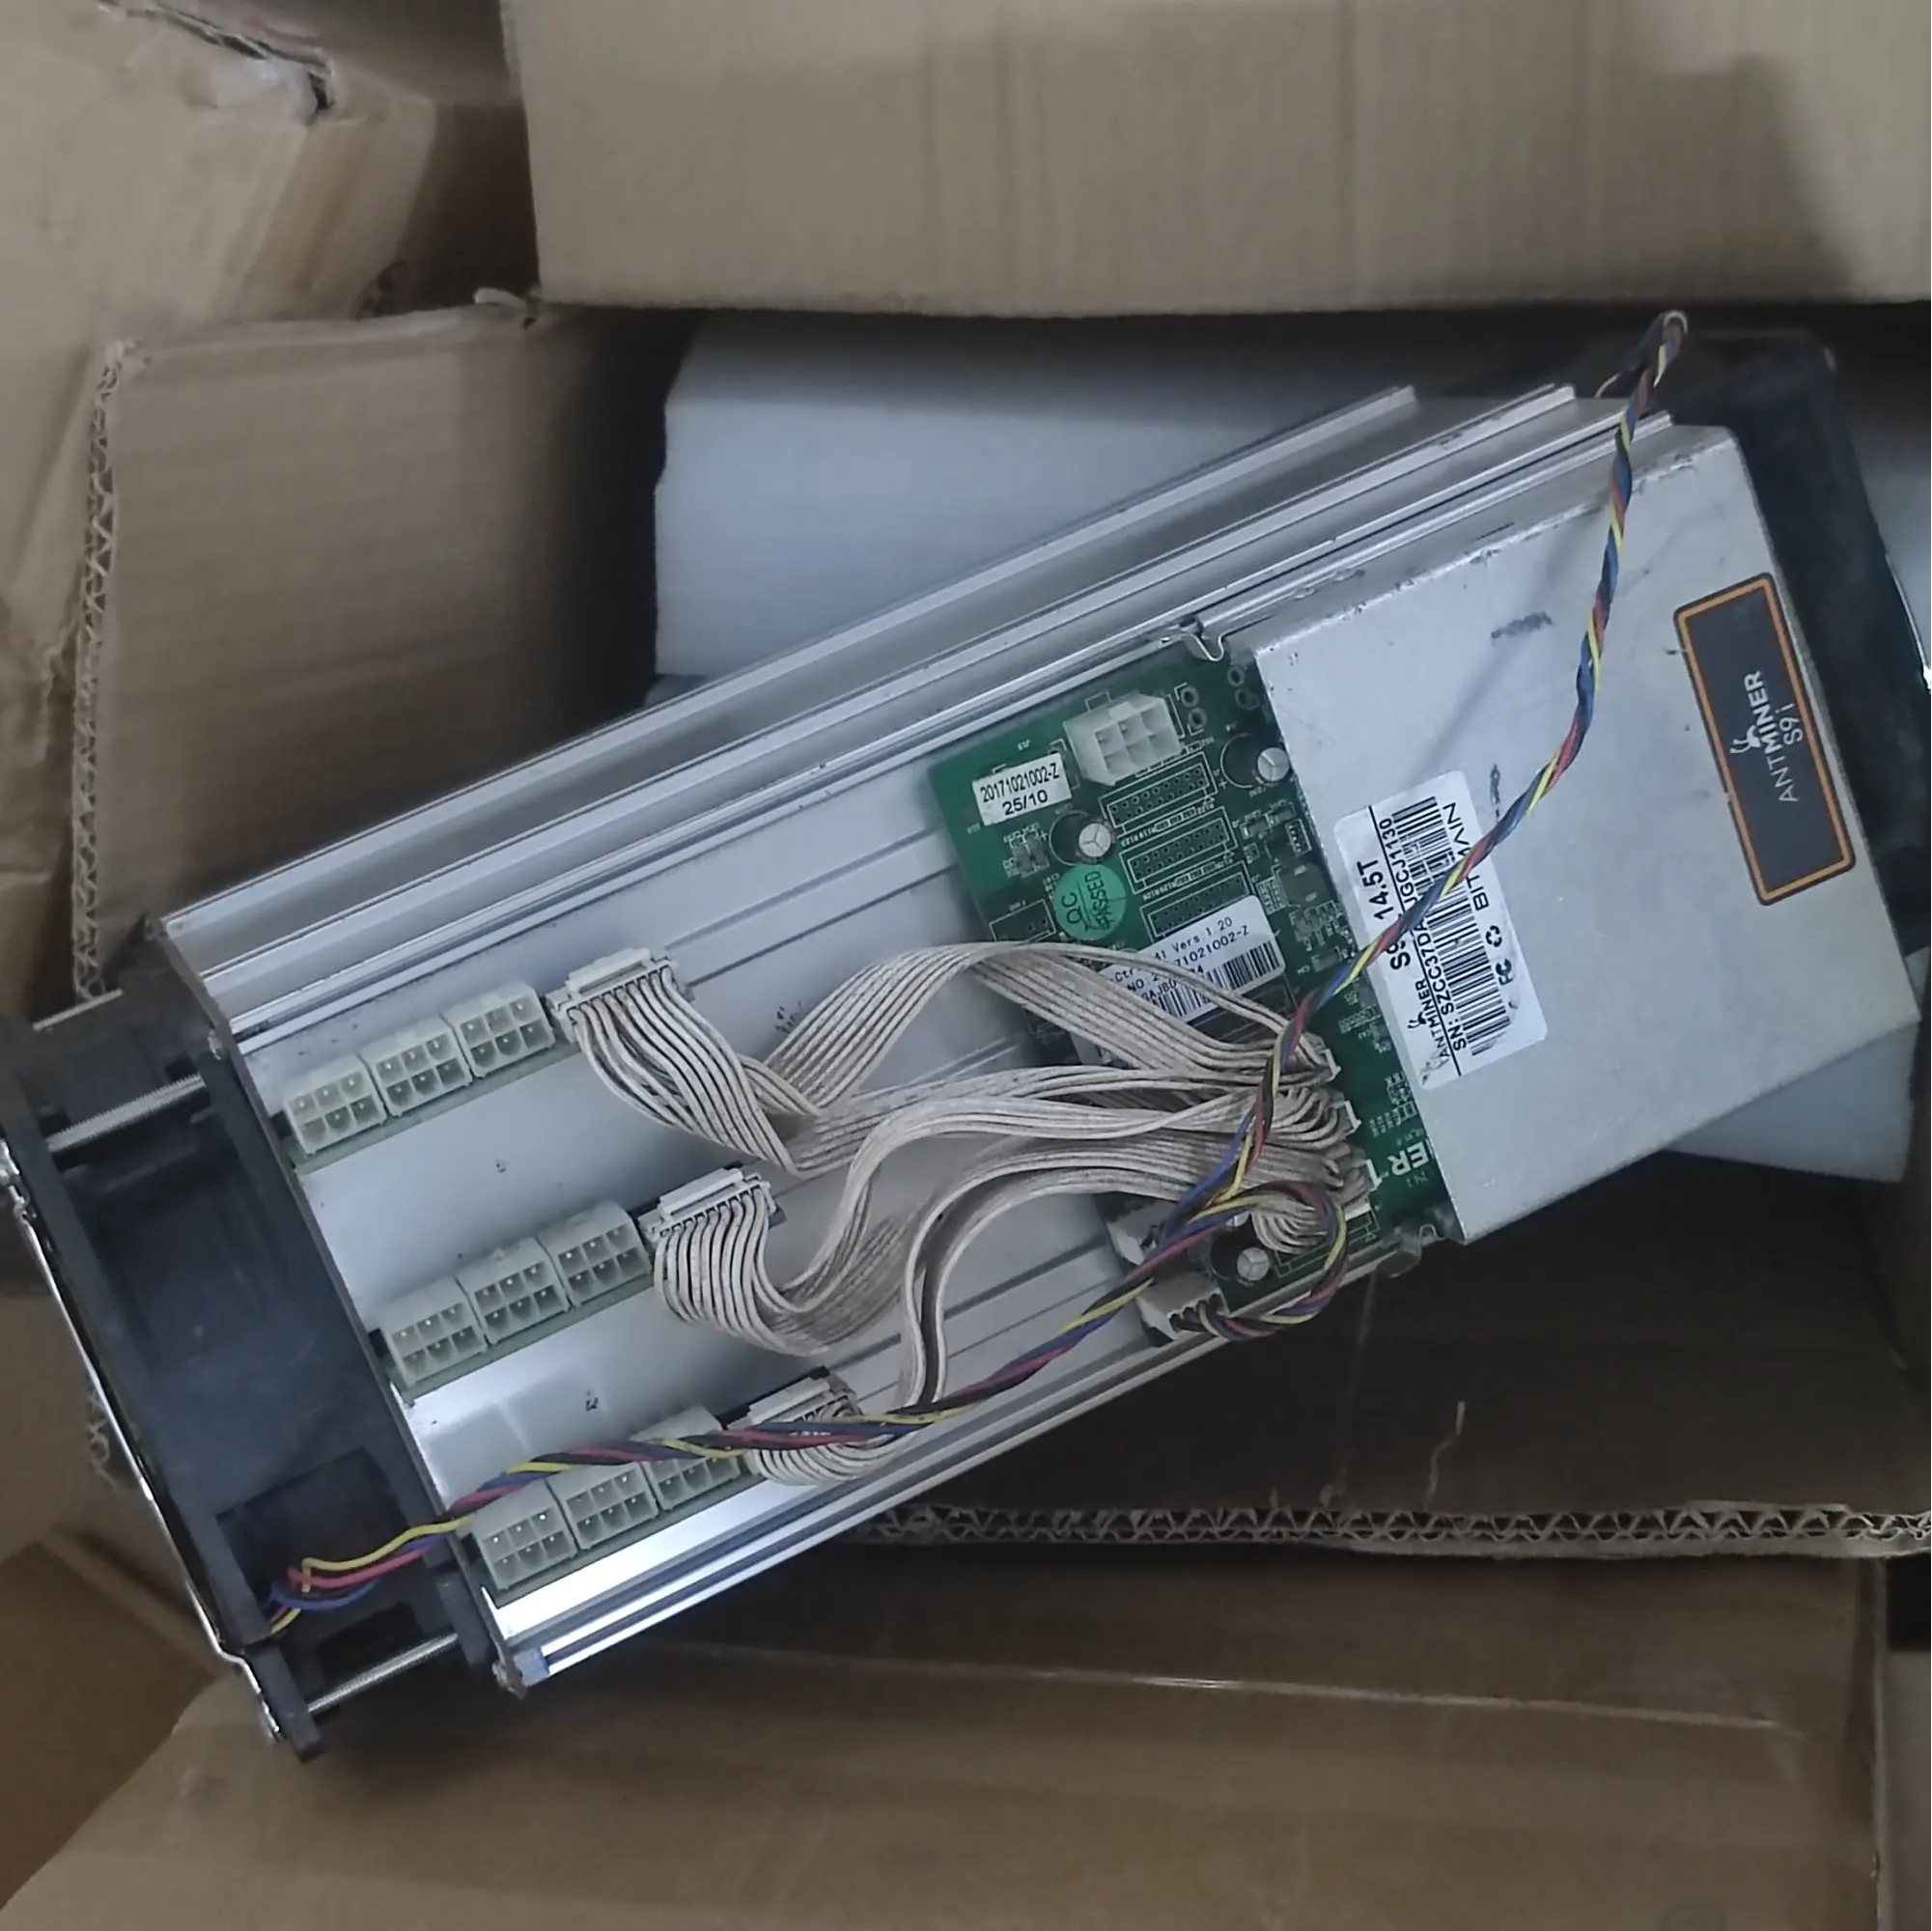 BITMAIN Mining Farm 80% New AntMiner S9i 14.5T With Official PSU BTC BCH Miner Better Than S9 S9i 13.5T 14T photo review